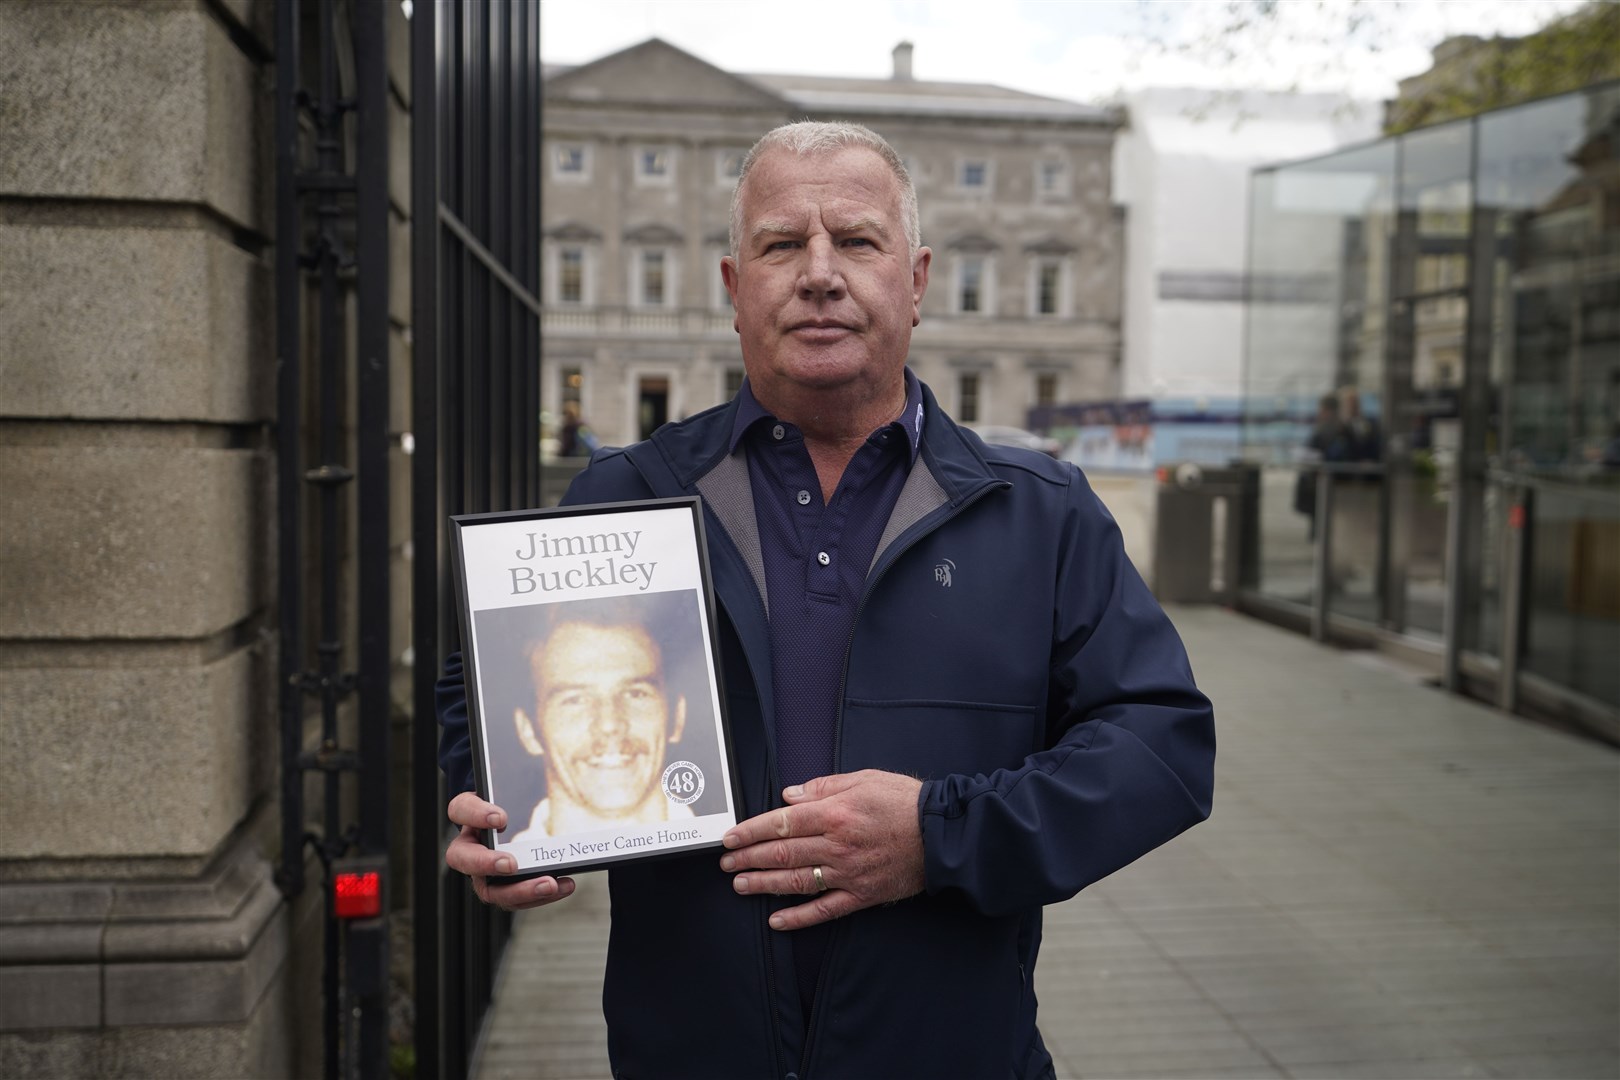 Errol Buckley holds a photo of his brother Jimmy Buckley, who died in the fire, as he arrives at Leinster House, Dublin (Niall Carson/PA)